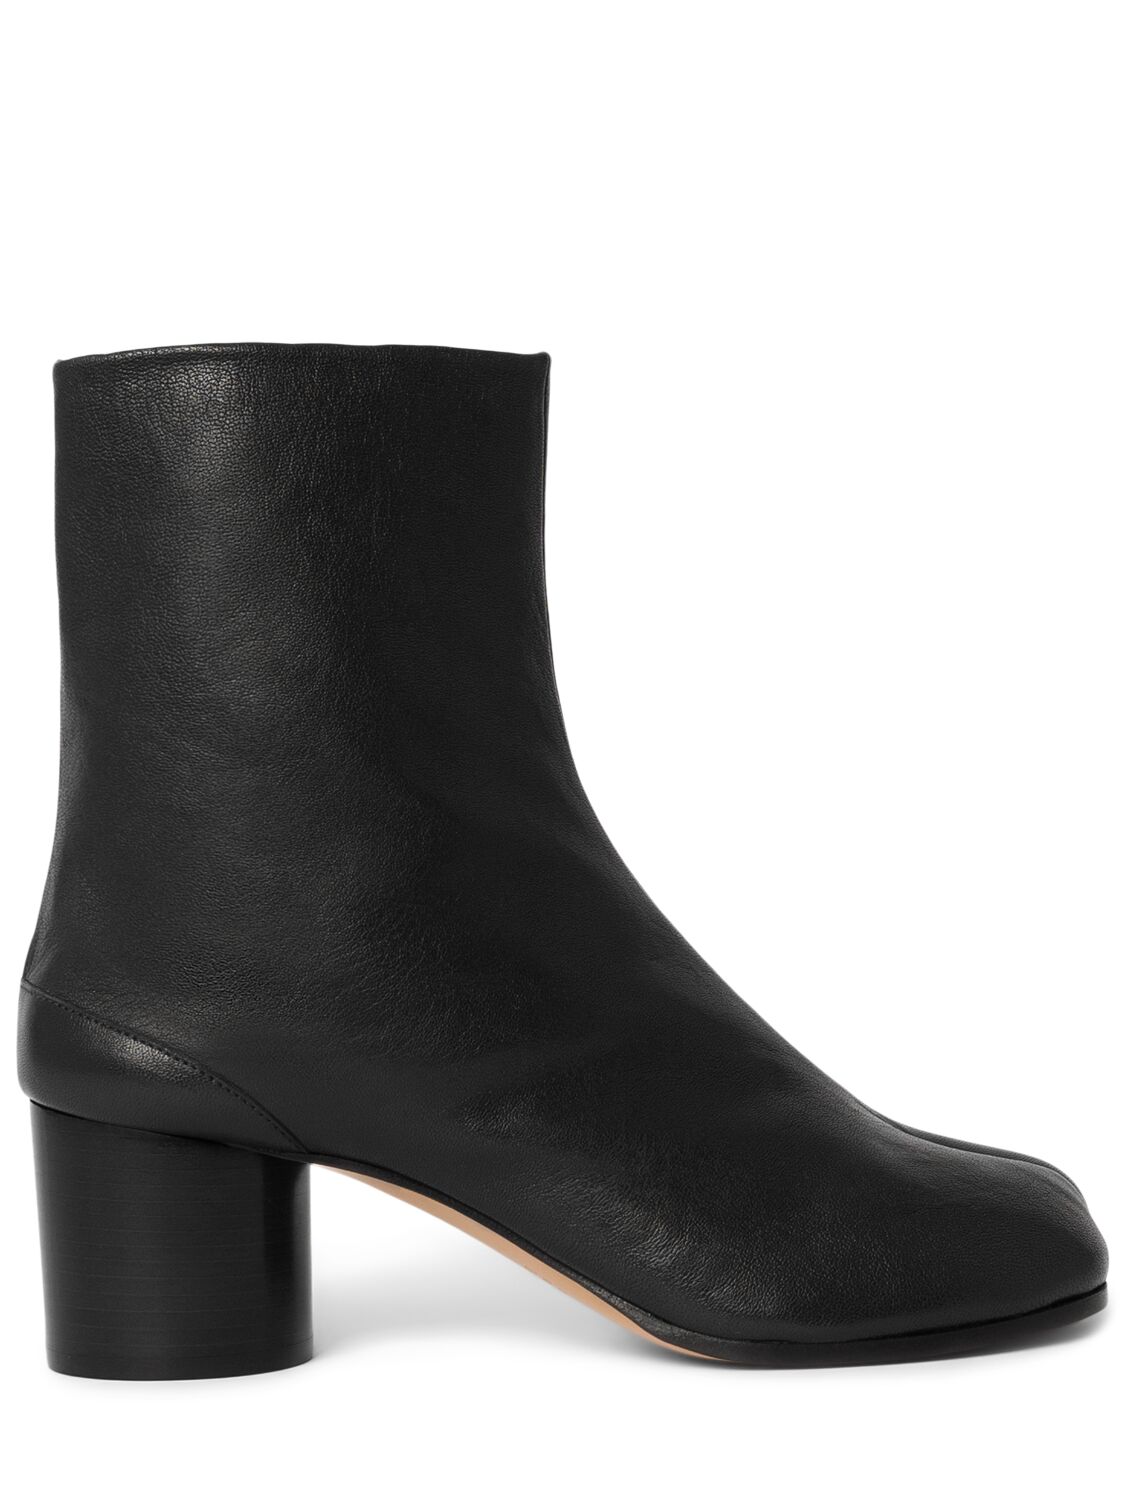 Maison Margiela 60mm Tabi Leather Ankle Boots In Black